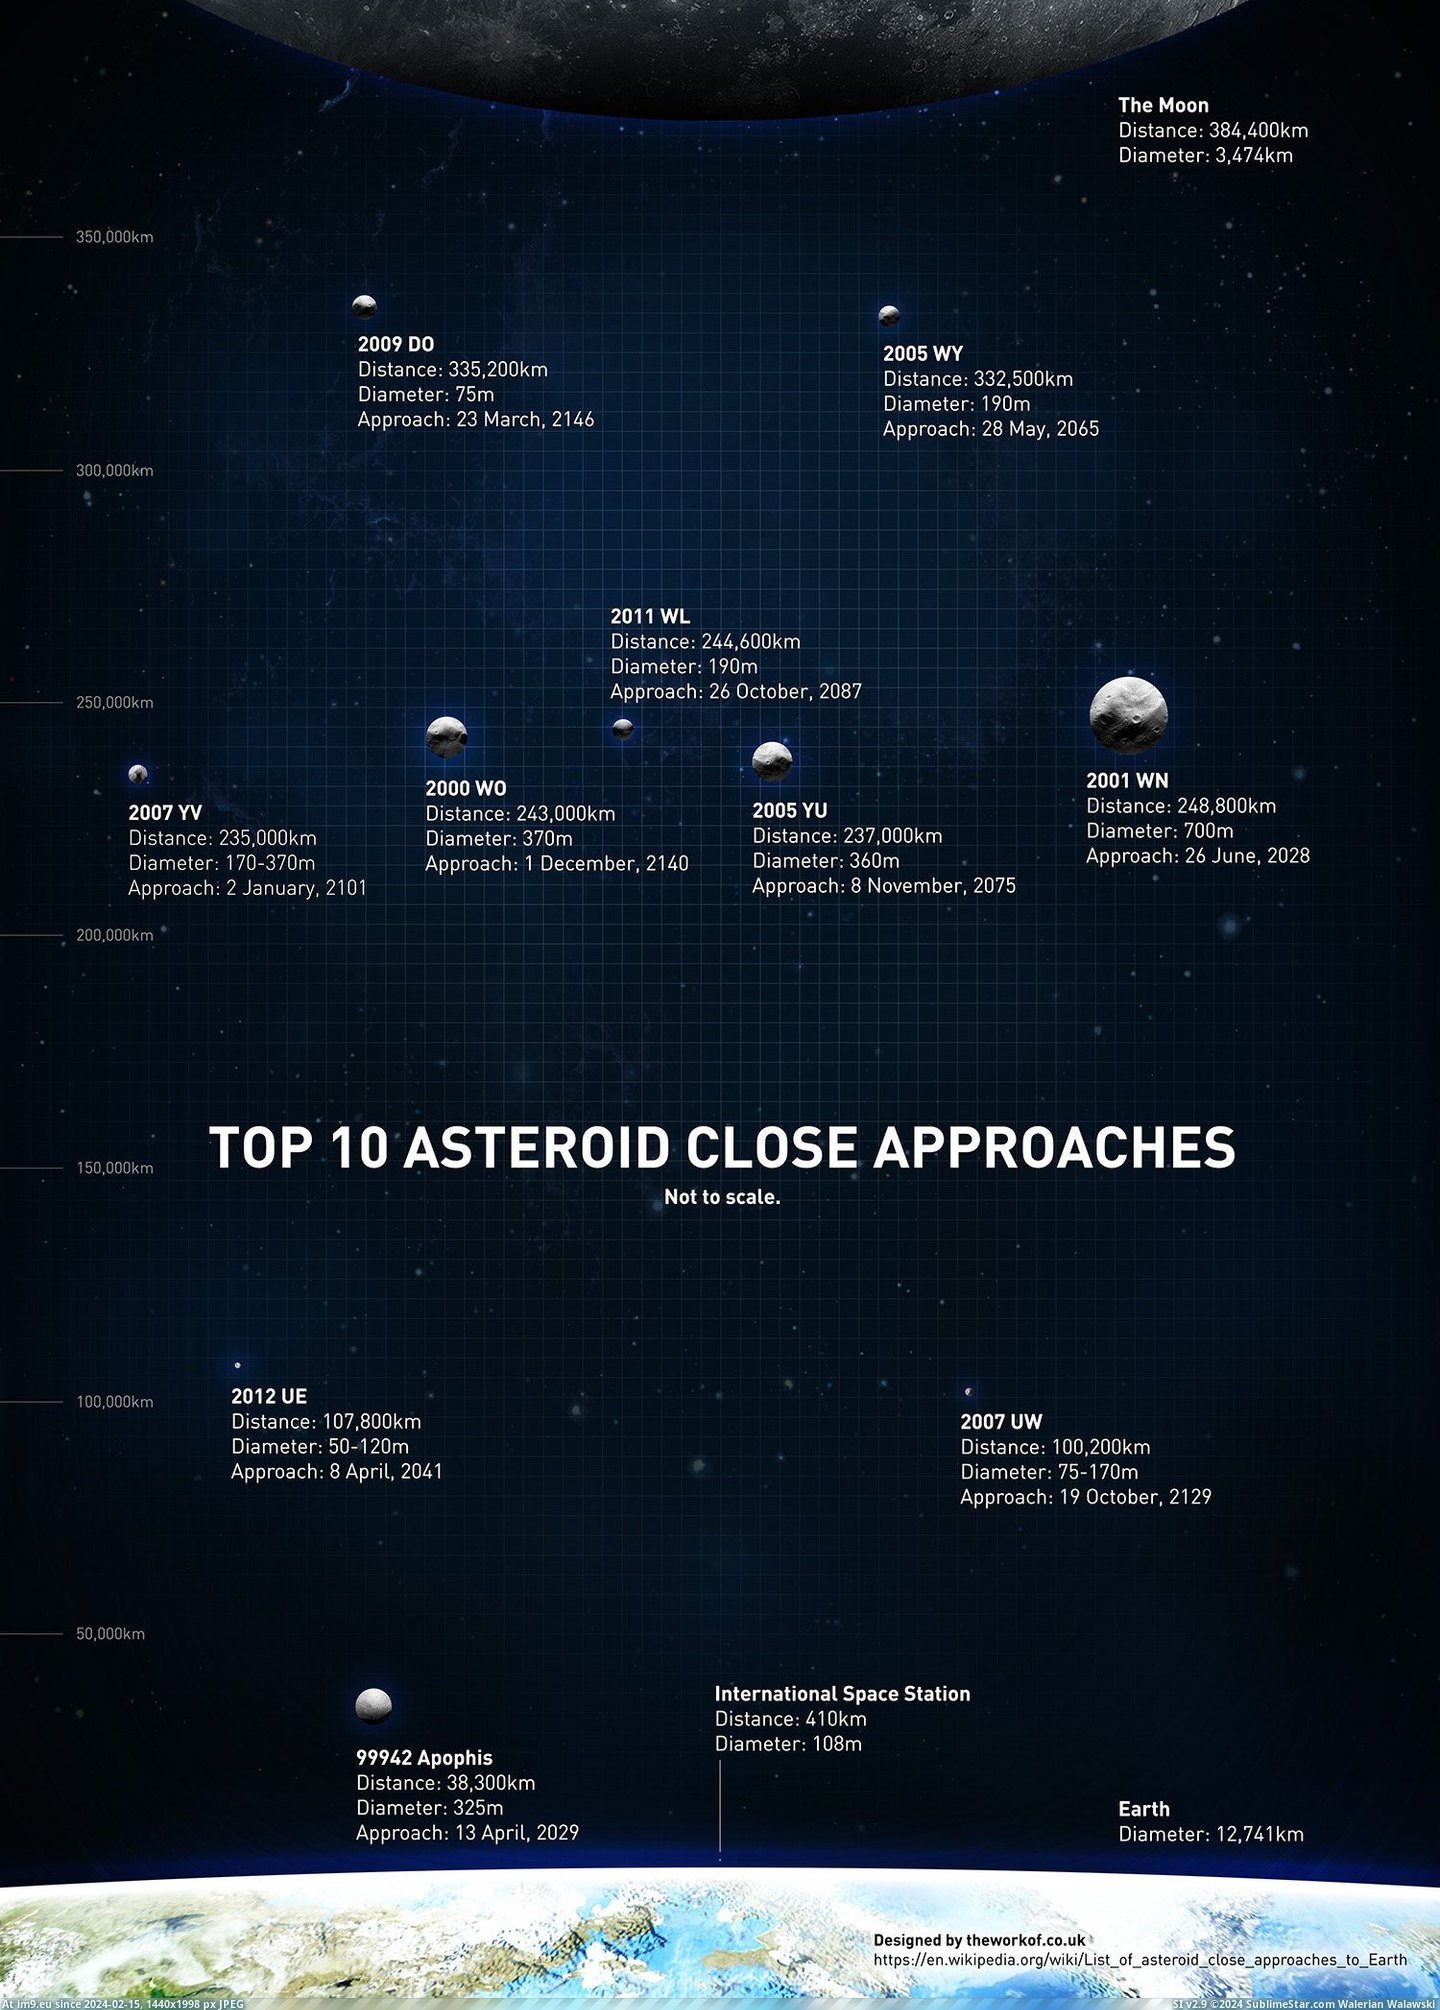 [Dataisbeautiful] The top 10 asteroid close approaches (in My r/DATAISBEAUTIFUL favs)